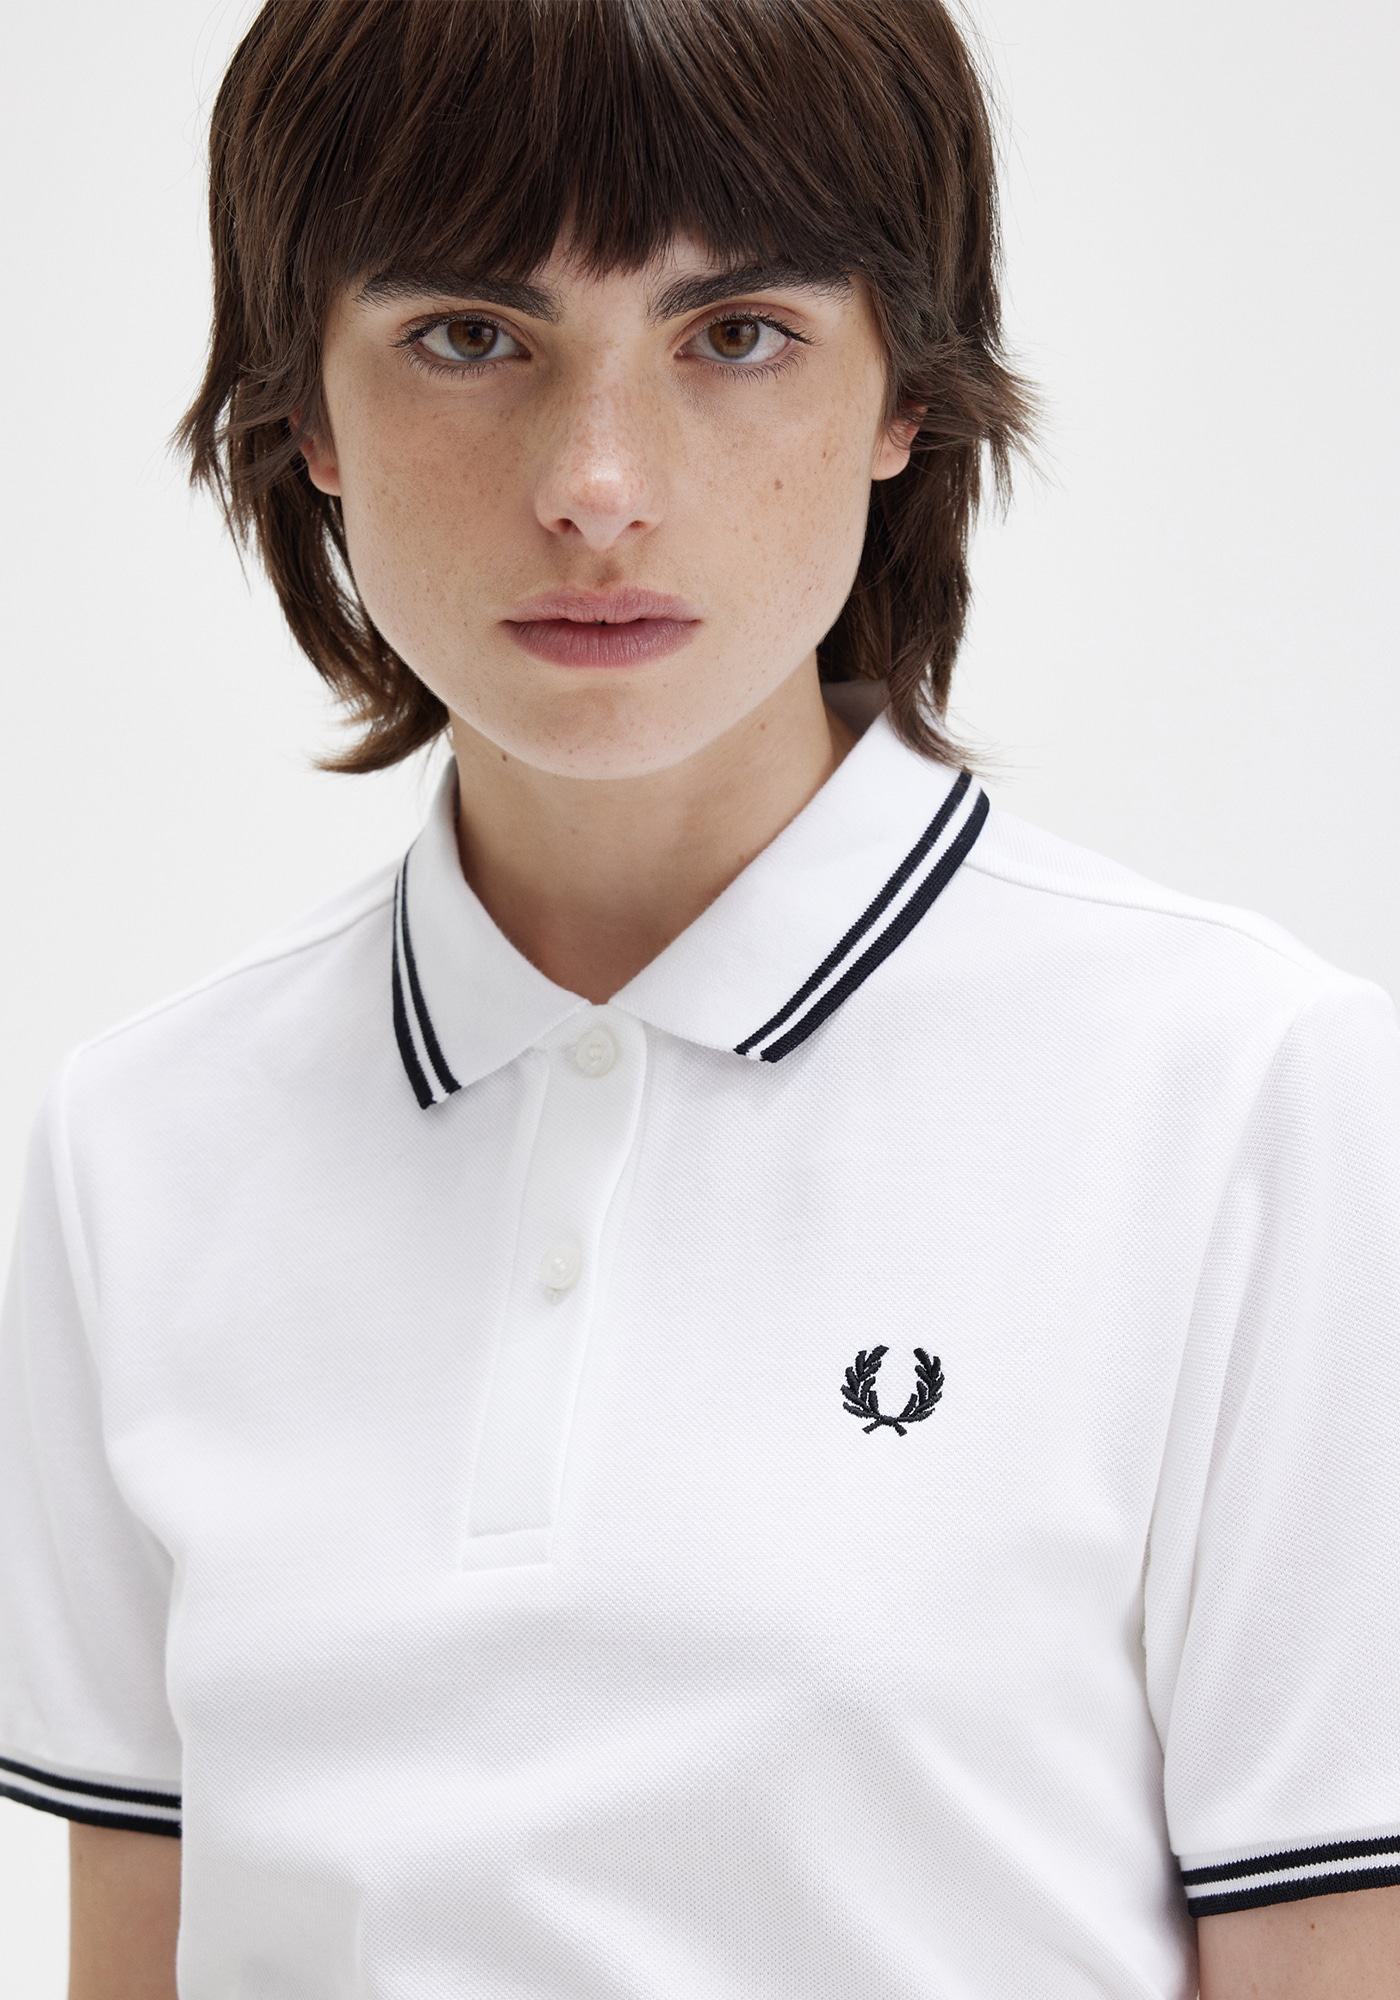 The Fred Perry Shirt - G3600